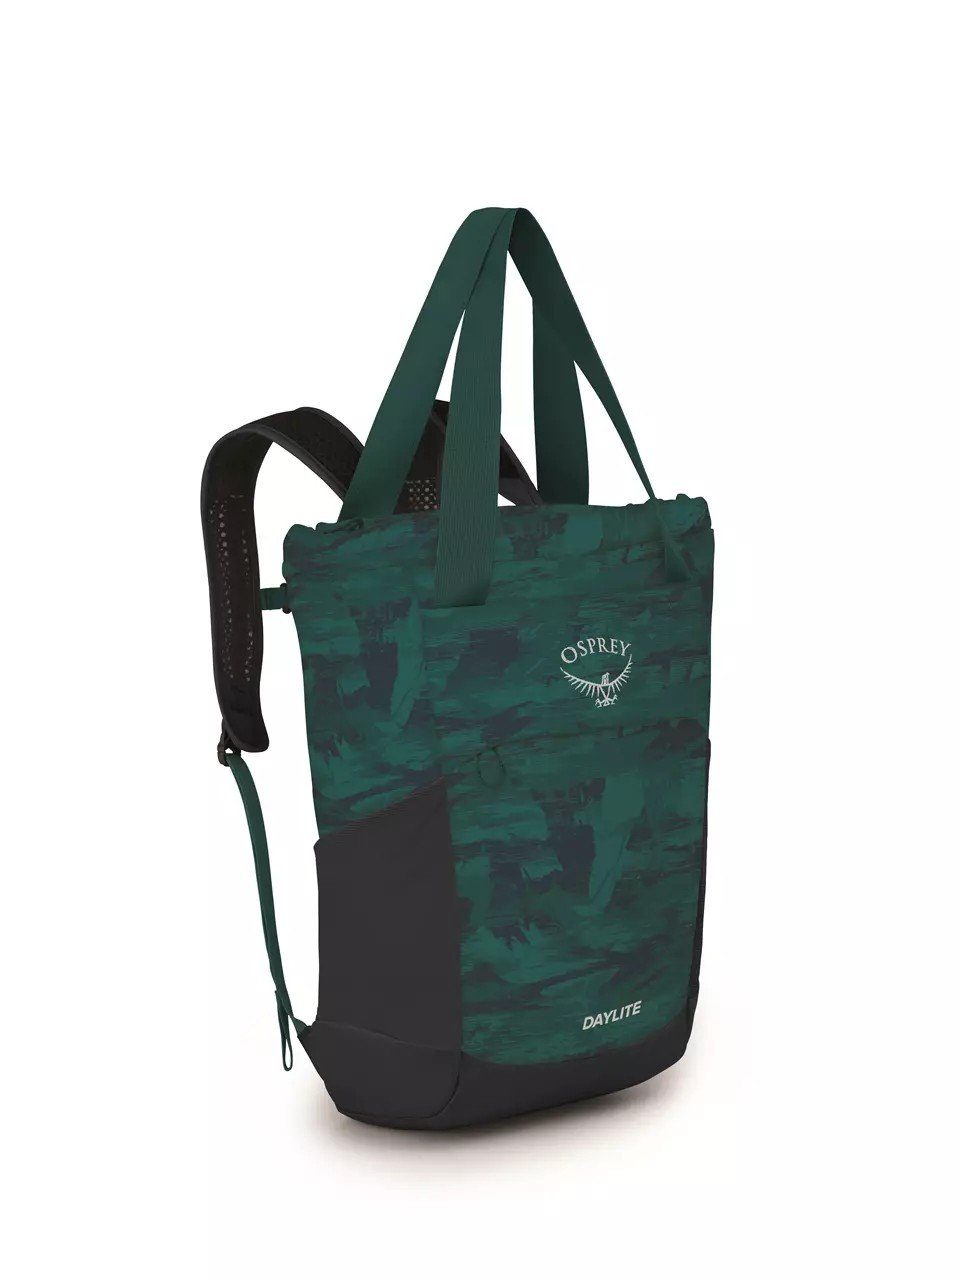 arches Tote Tagesrucksack green night Osprey Pack Daylite